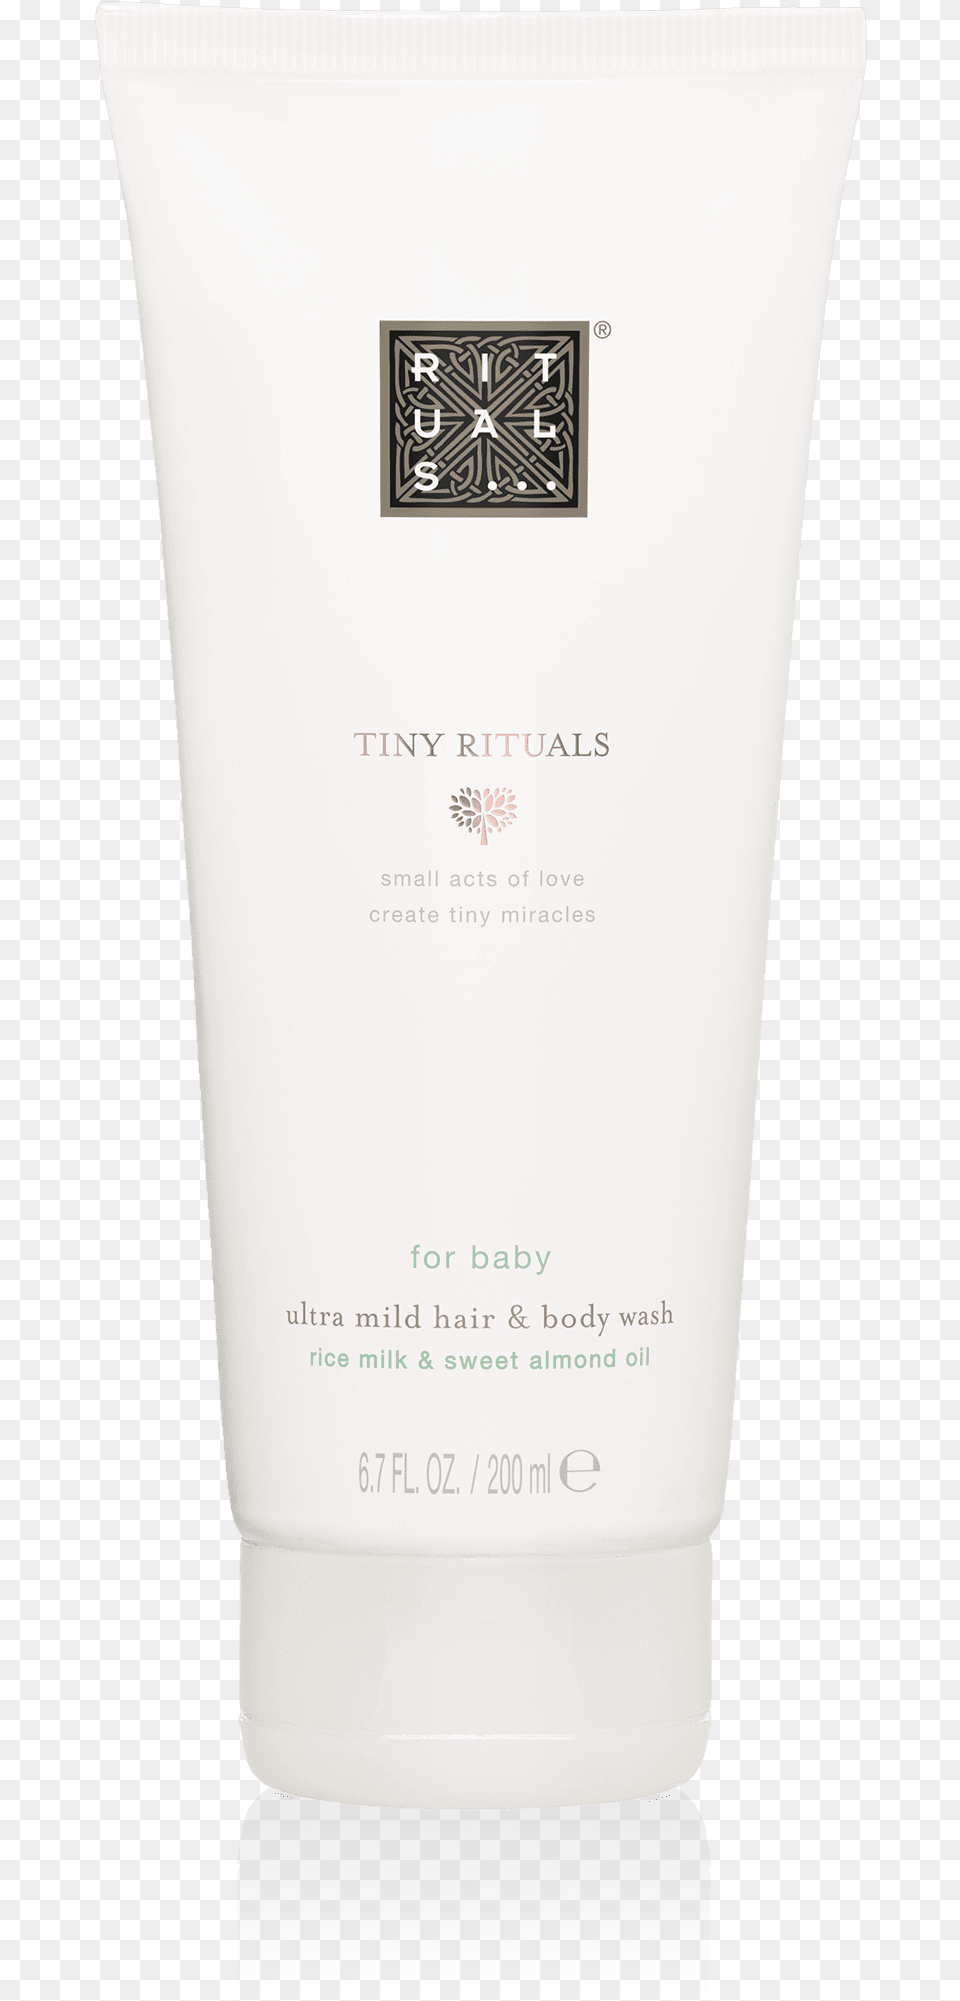 Tiny Rituals Baby Hair Amp Body Washtitle Tiny Rituals Forever Living Marine Mask, Bottle, Lotion, Aftershave, Cosmetics Png Image